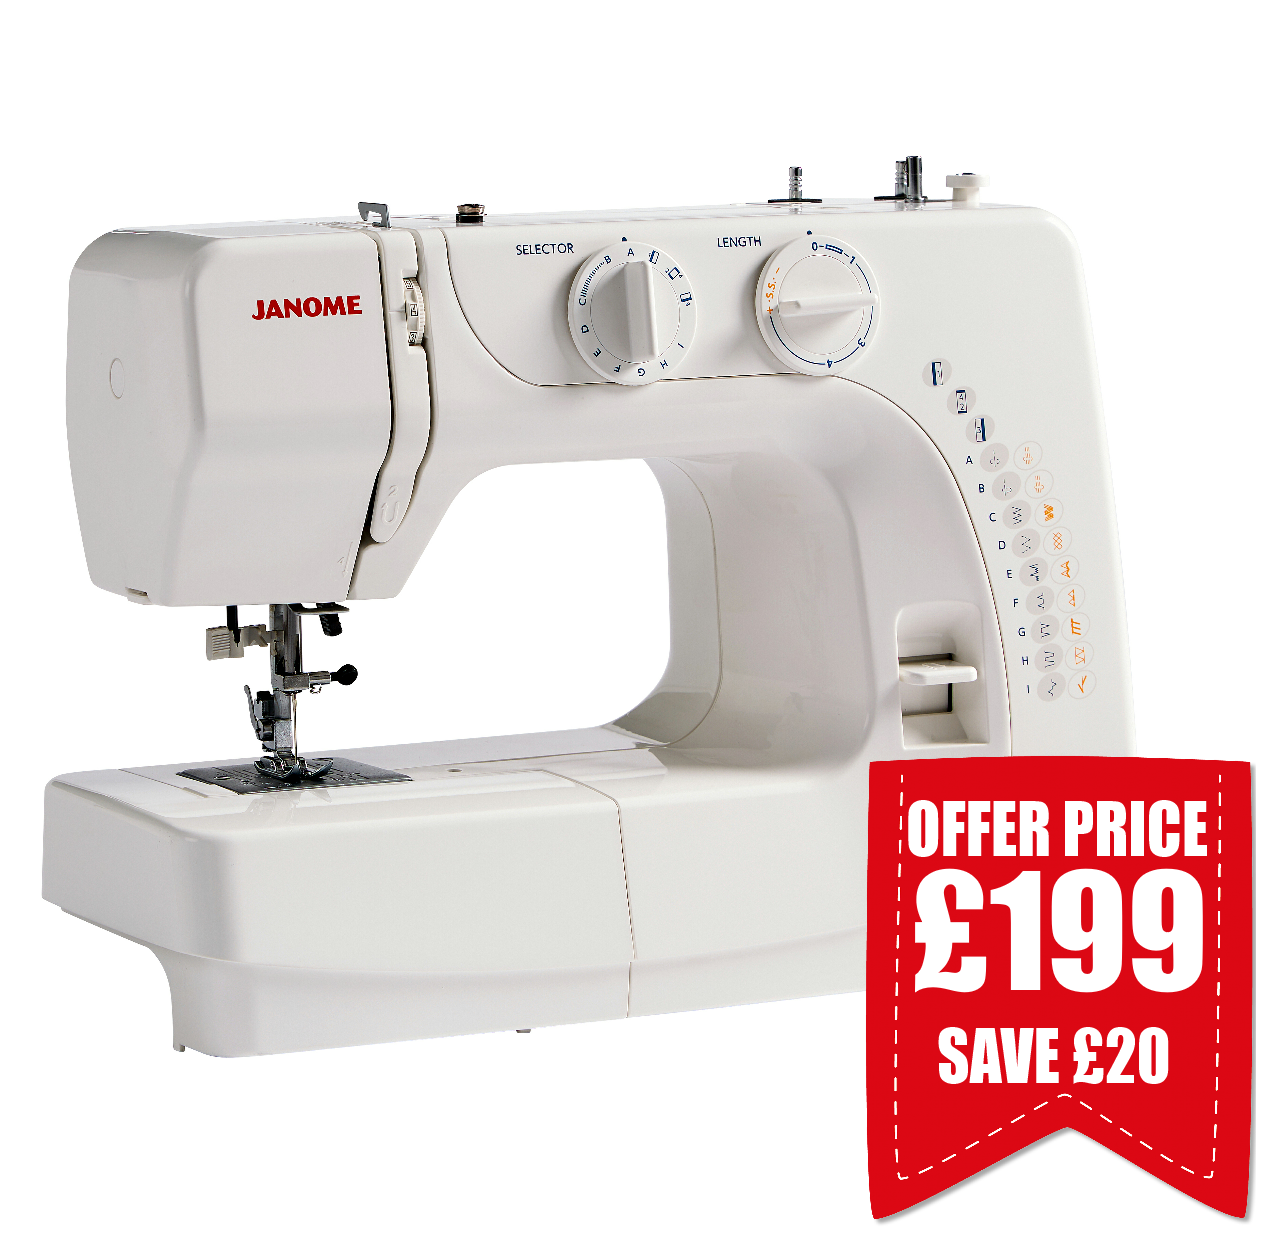 Janome J3-18 Sewing Machine - Save £20 from Jaycotts Sewing Supplies